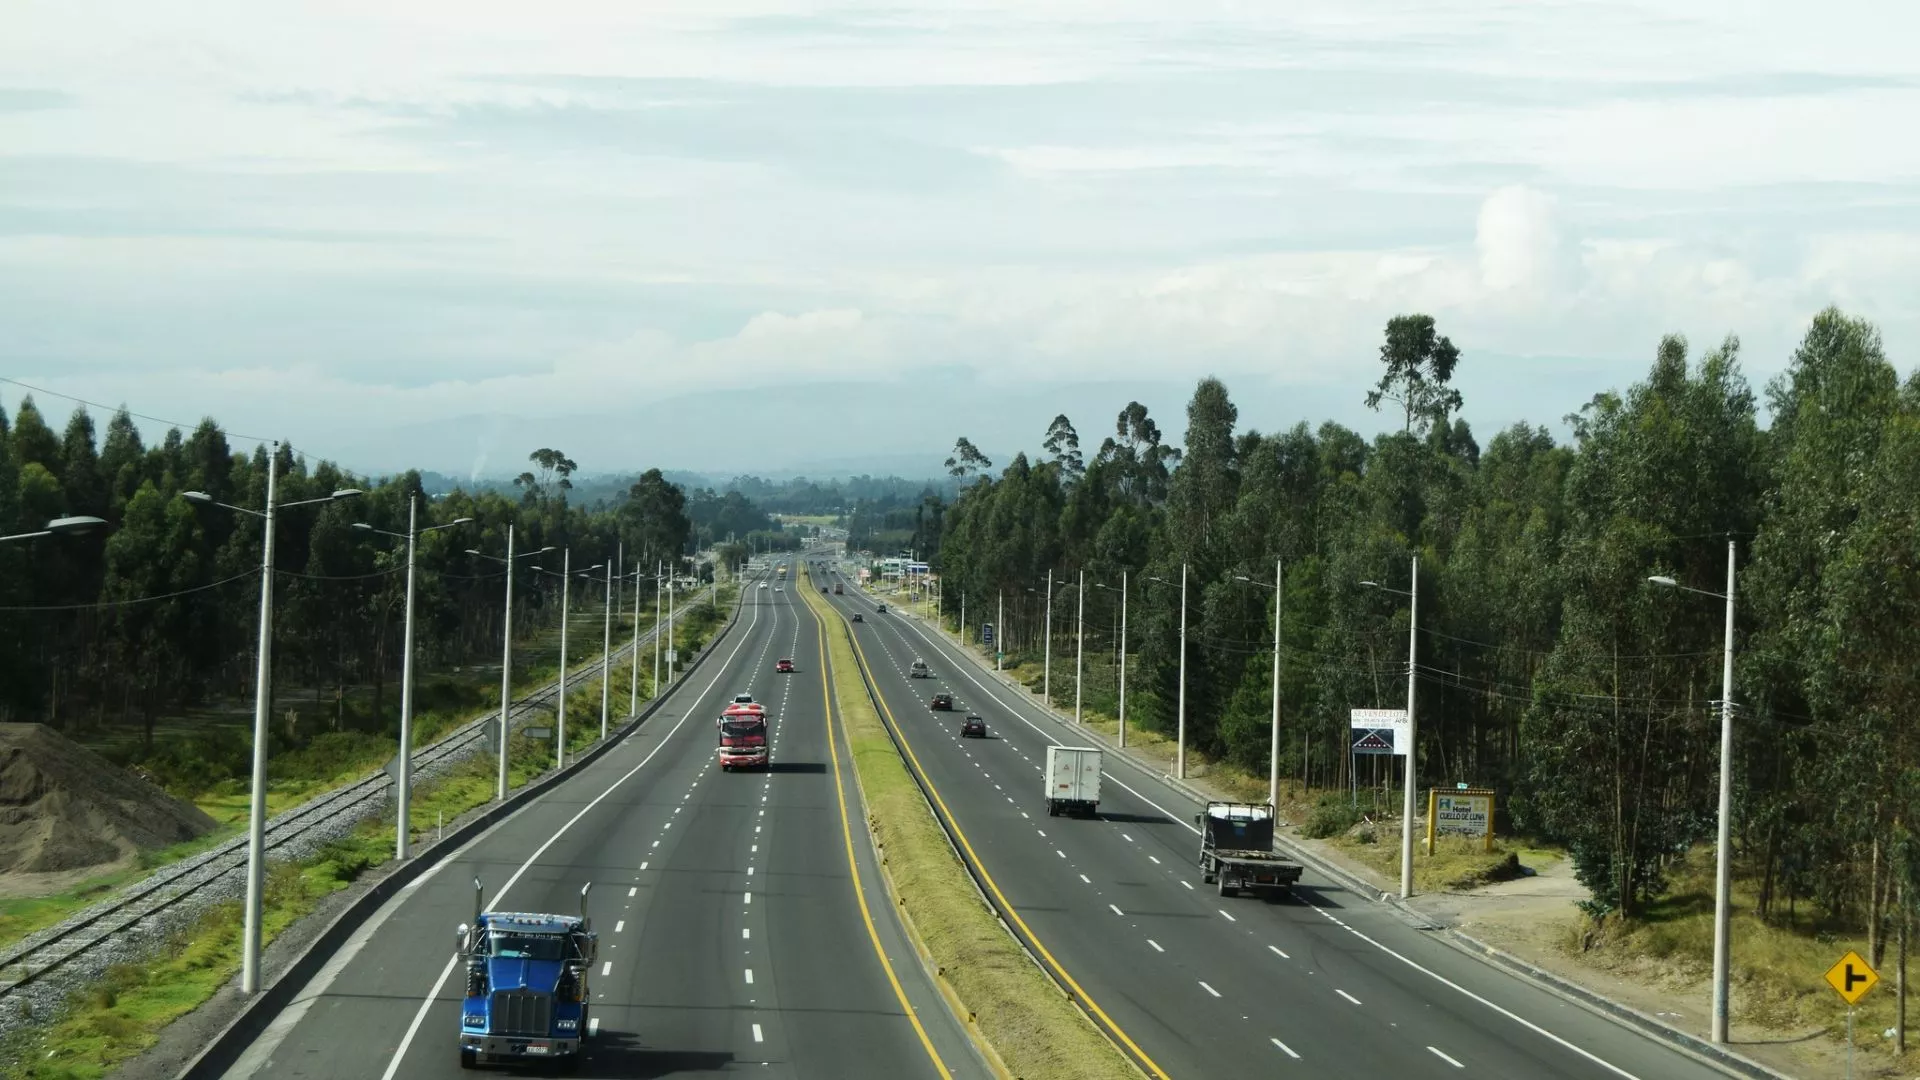 AxxonSoft powers security monitoring for Pan-American Highway